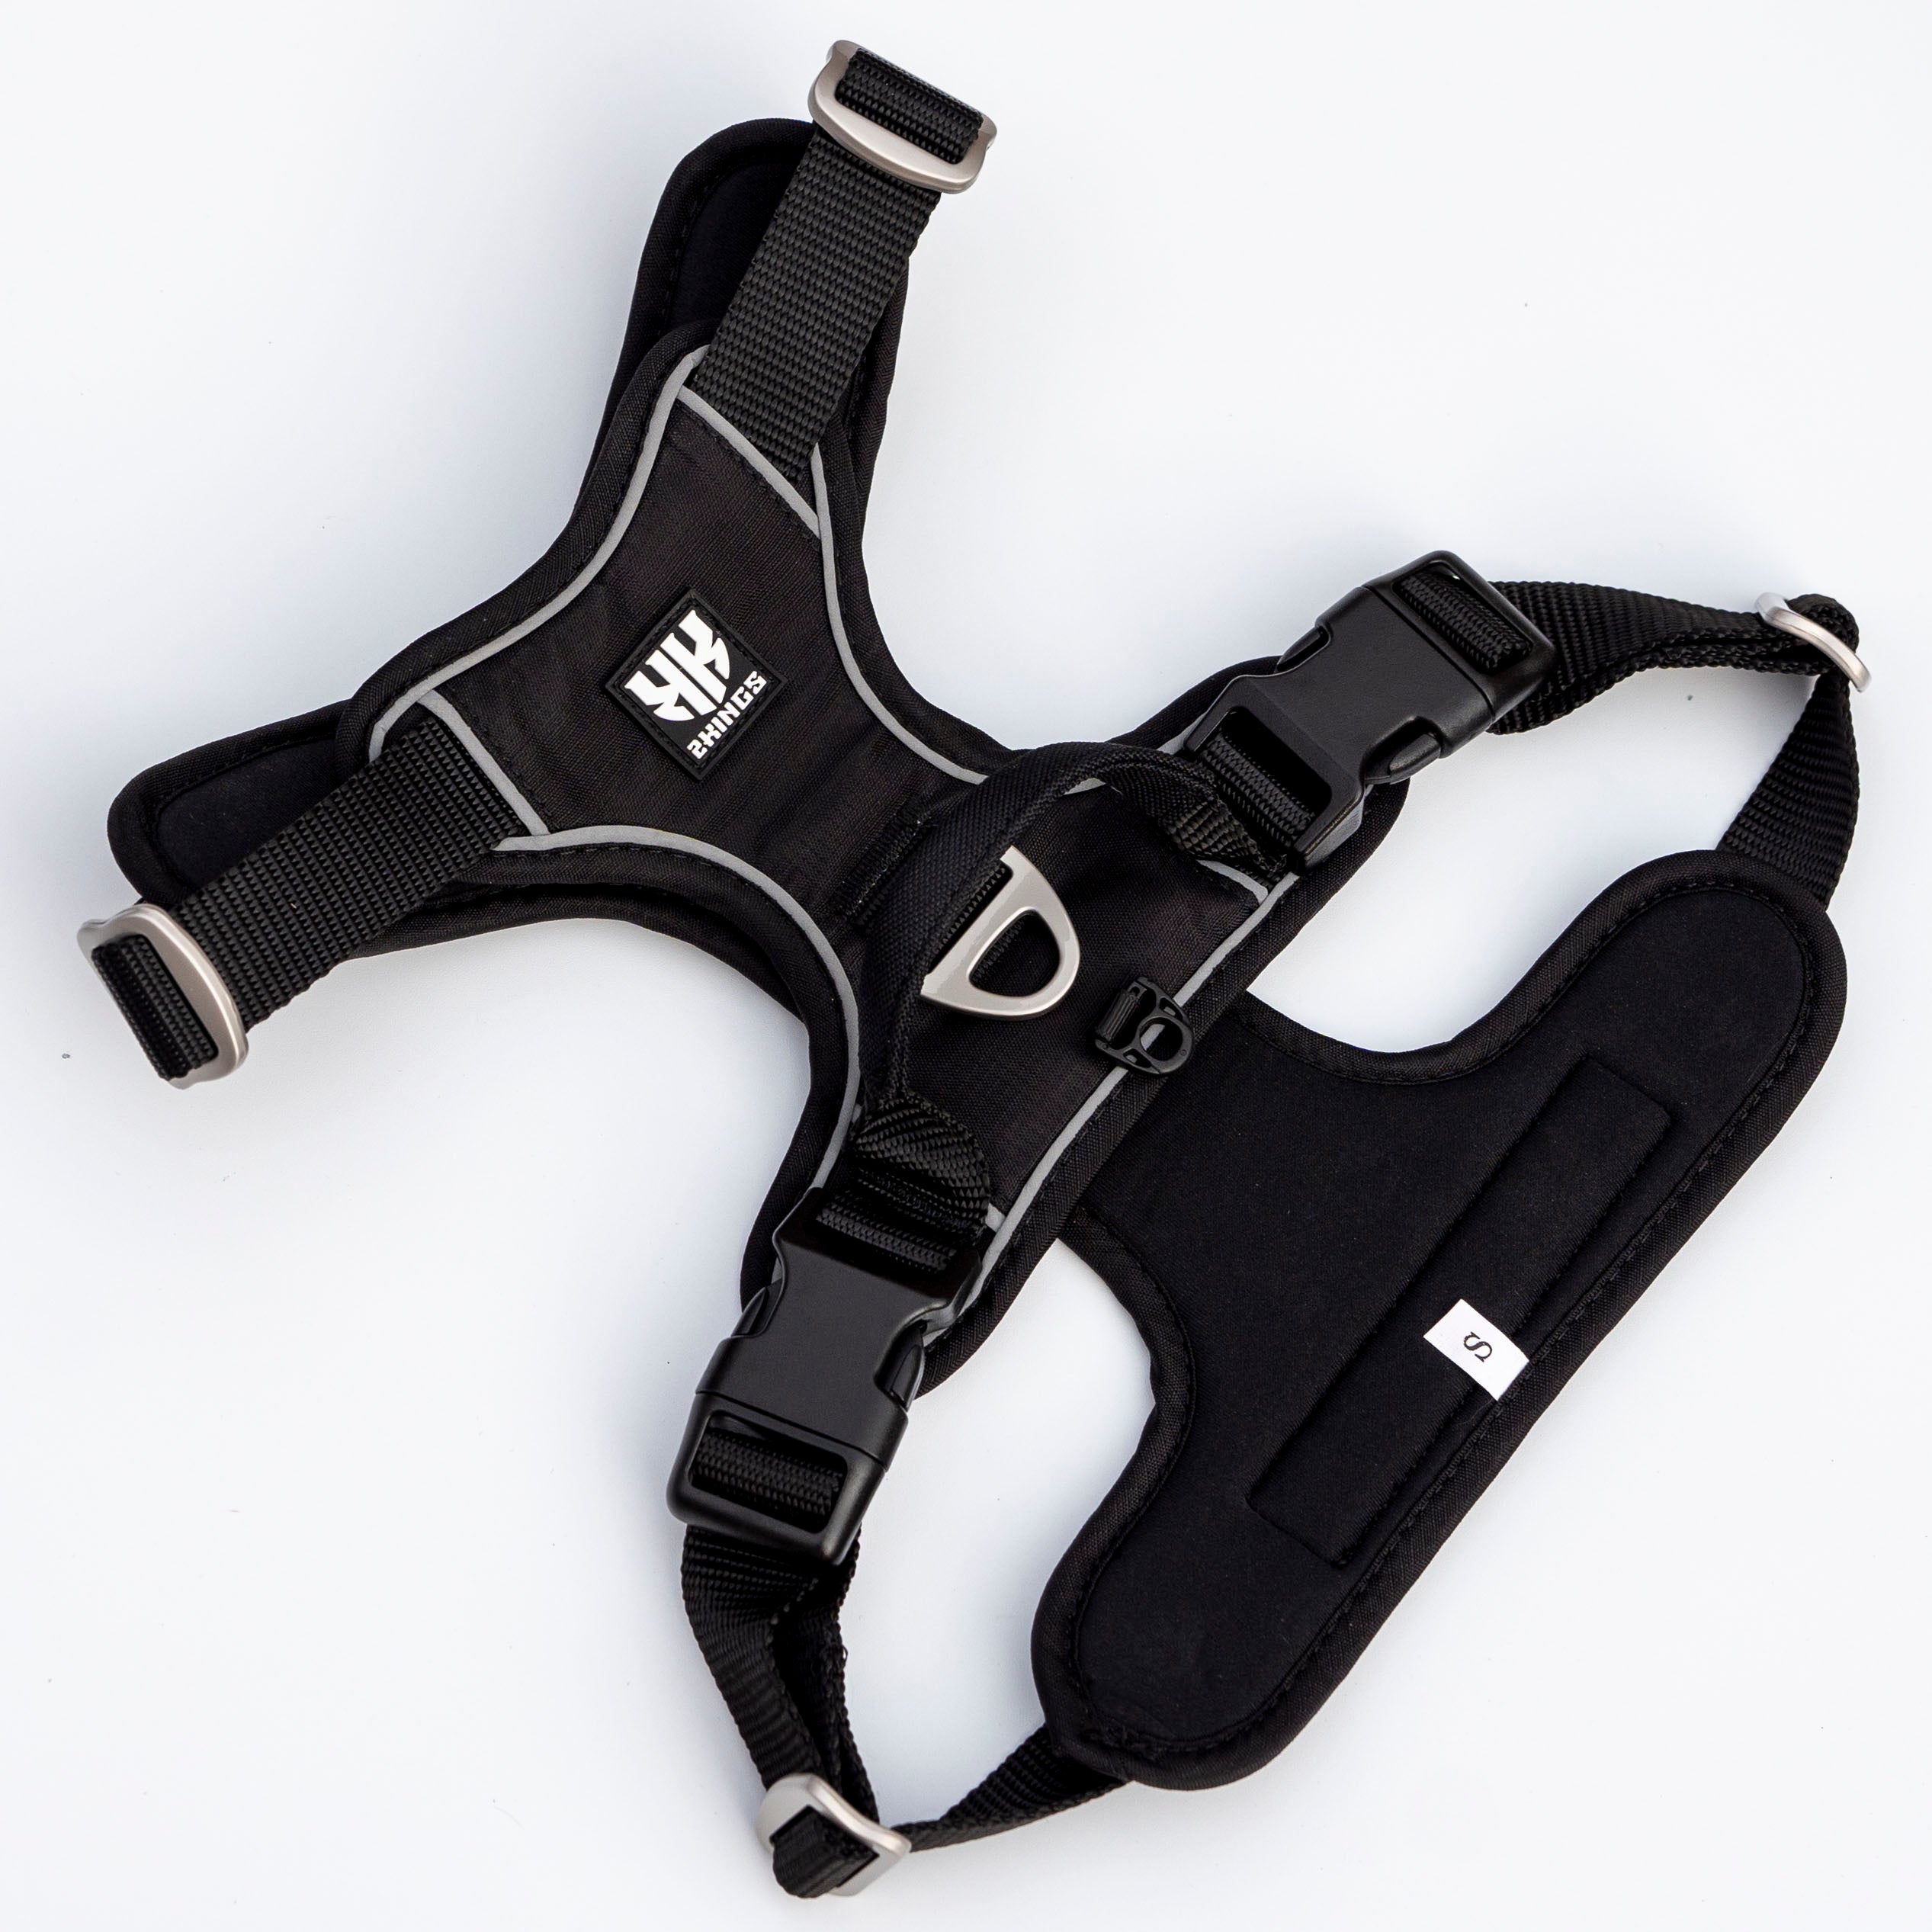 Comfort Dog Harness - Waterproof & Padded with Top Handle- Black.